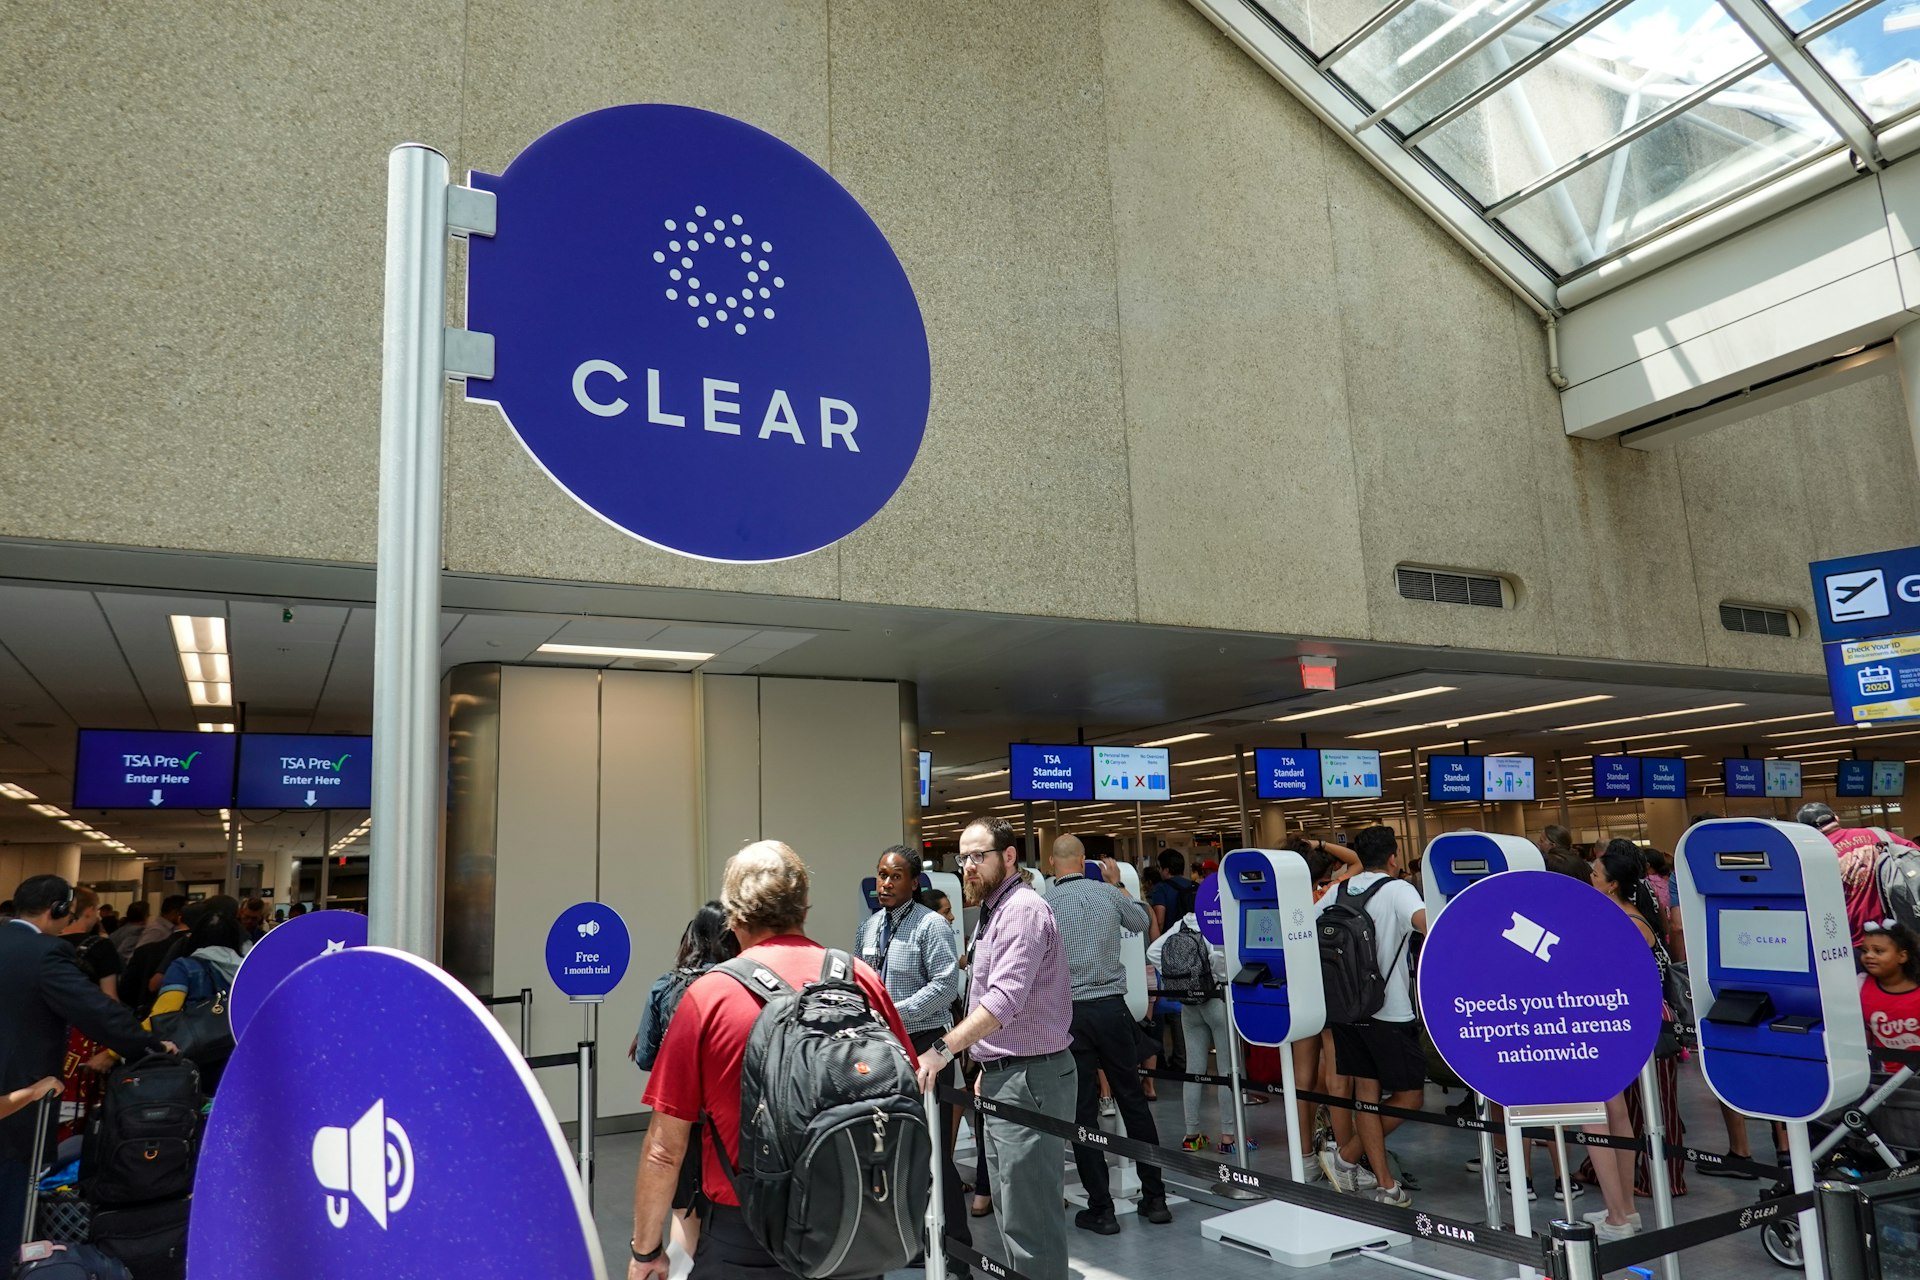 Airport security at a busy international airport with Clear